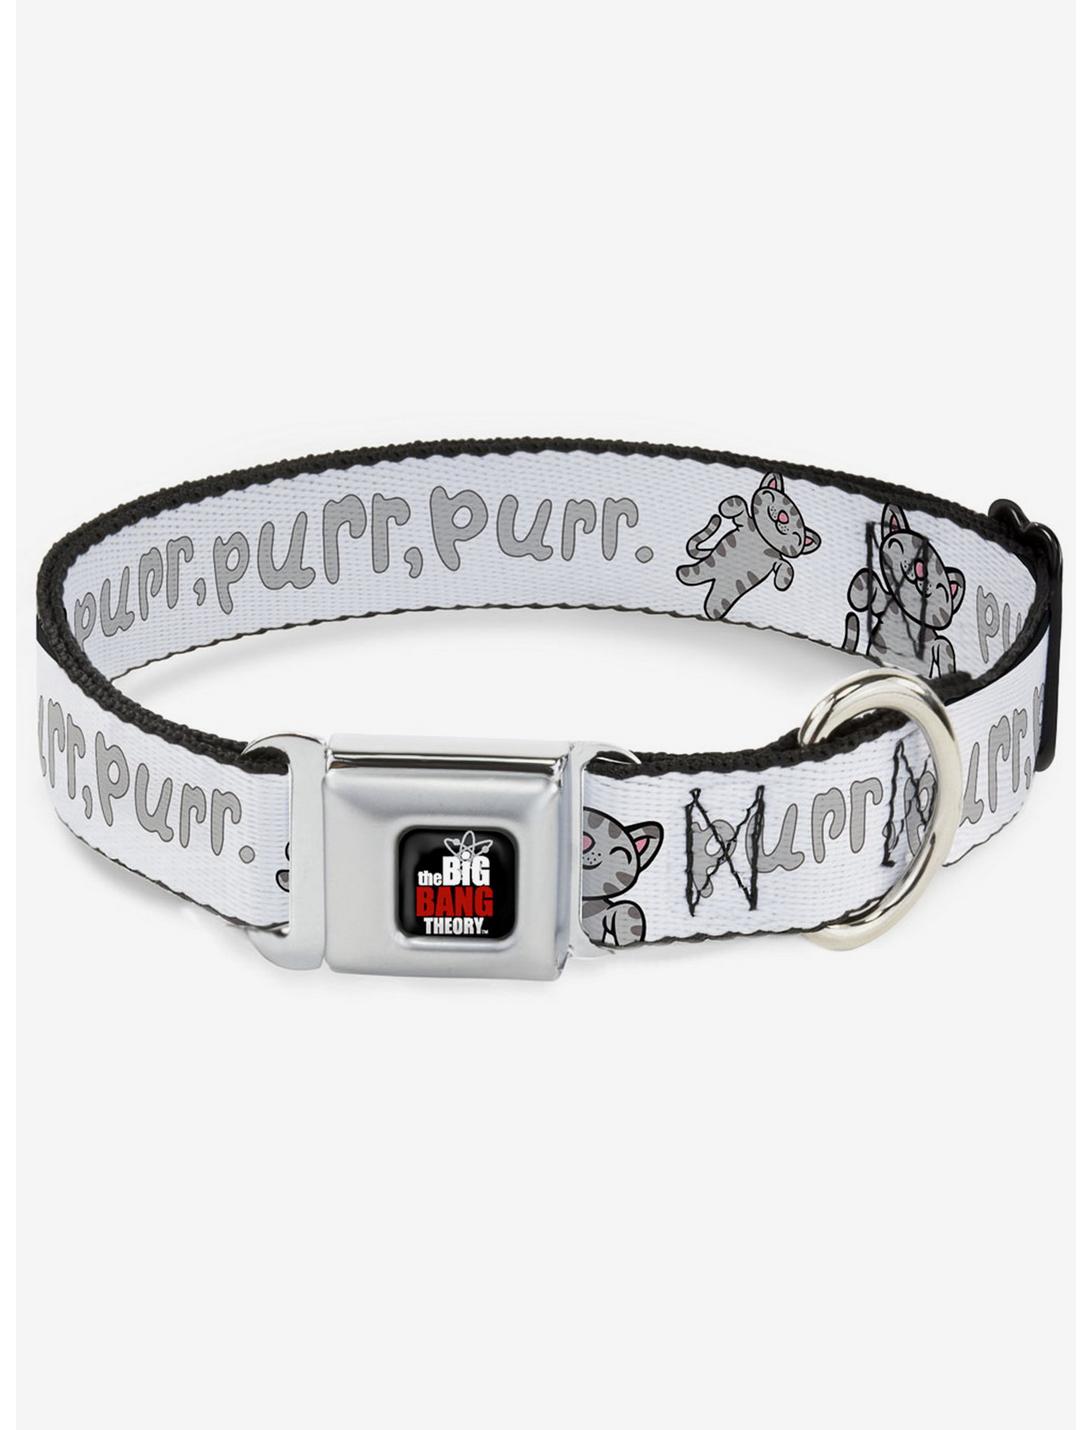 The Big Bang Theory Soft Kitty Purr Purr Purr Seatbelt Buckle Dog Collar, MULTICOLOR, hi-res